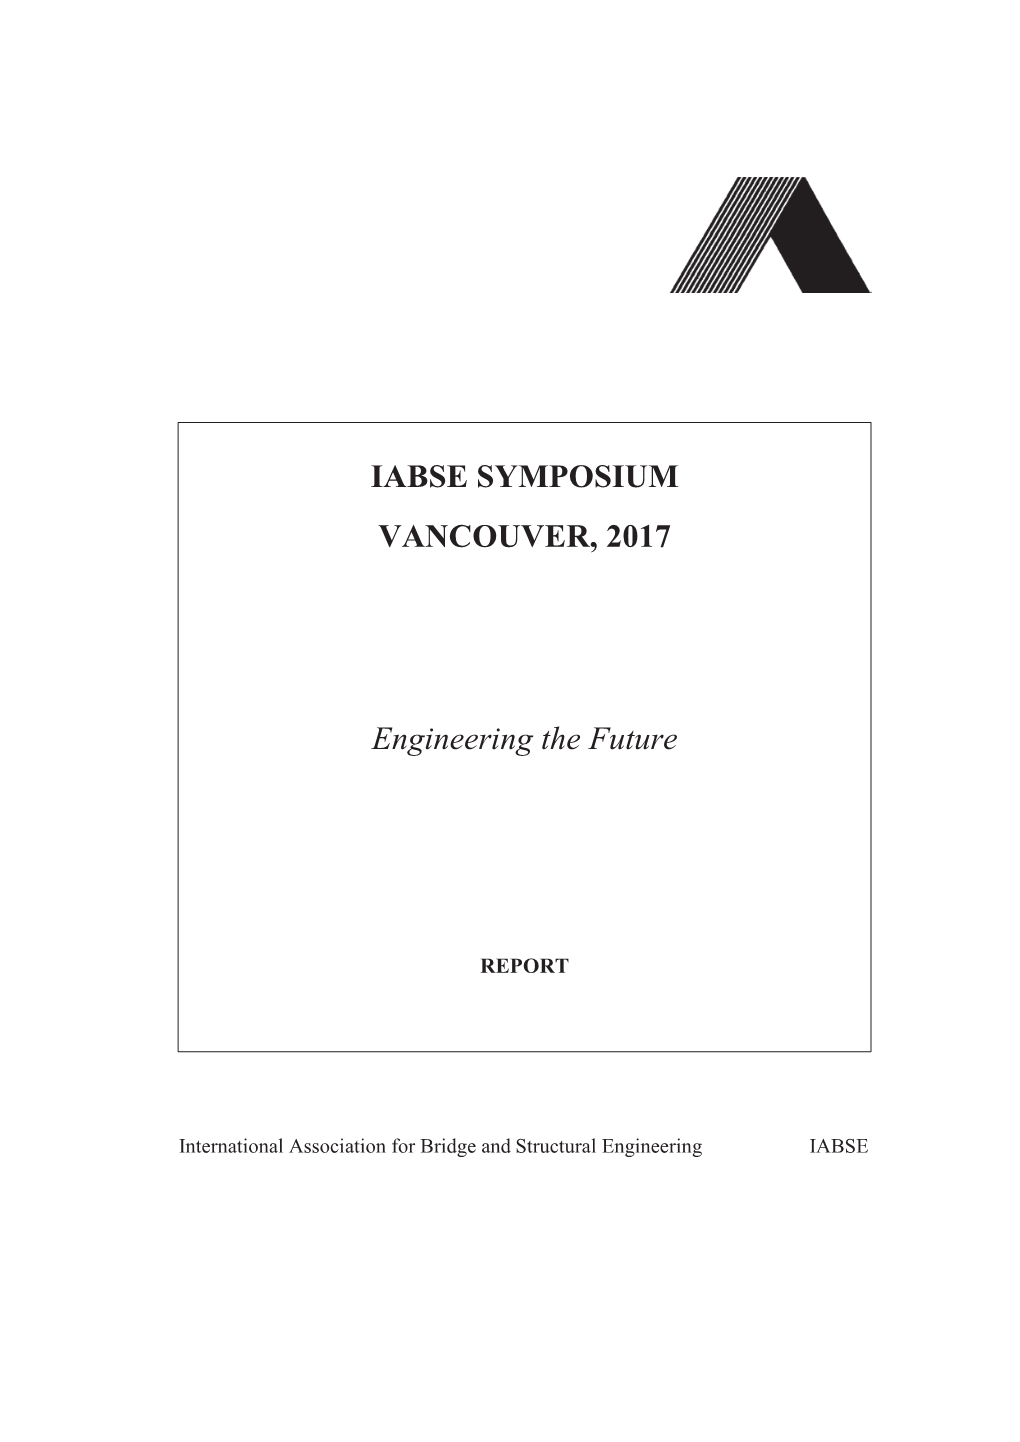 IABSE SYMPOSIUM VANCOUVER, 2017 Engineering the Future